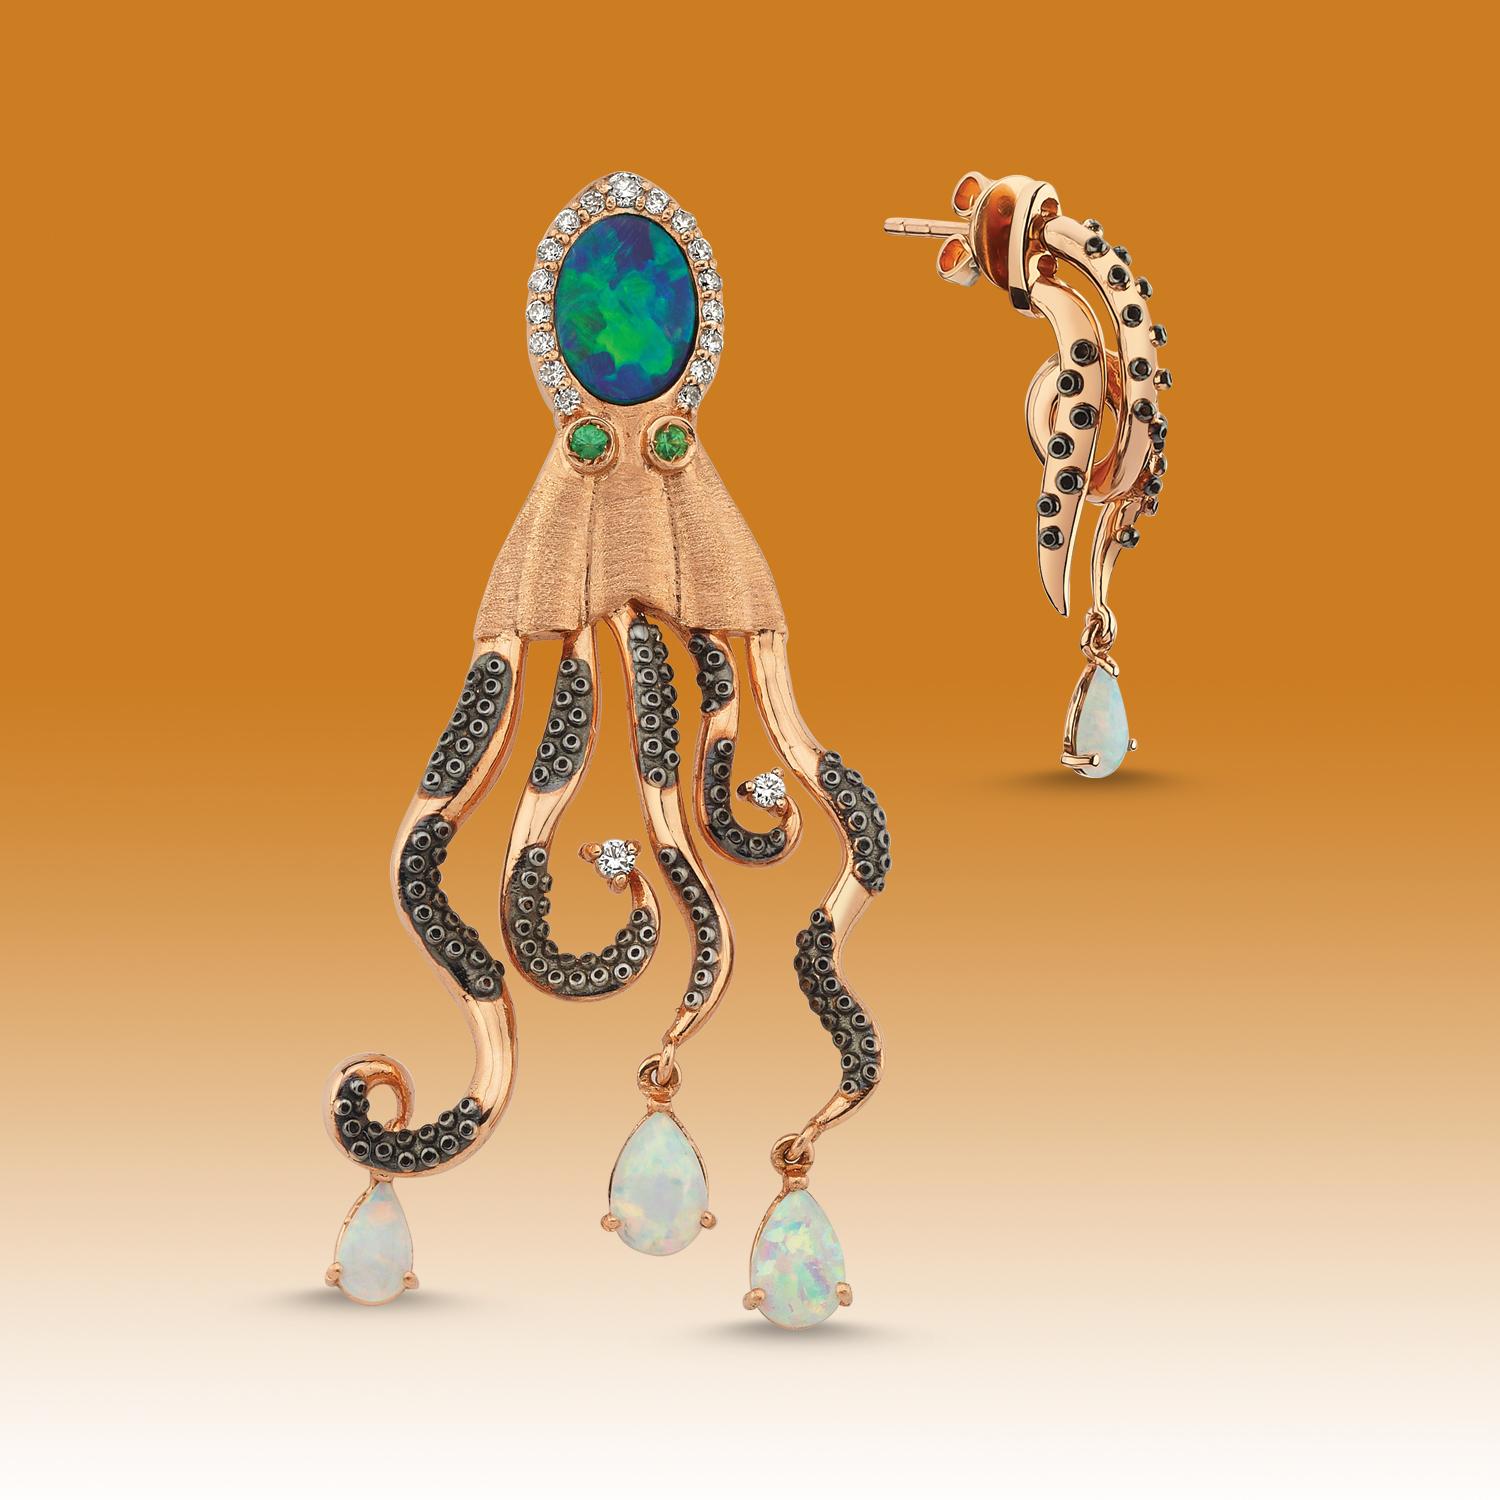 The Treasures of The Sea Collection is inspired by the water element which represents the treasures and natural stones hidden in the depths of the sea.

Nerice mini octopus 14k rose gold earring (single) with opal by Selda Jewellery

Additional